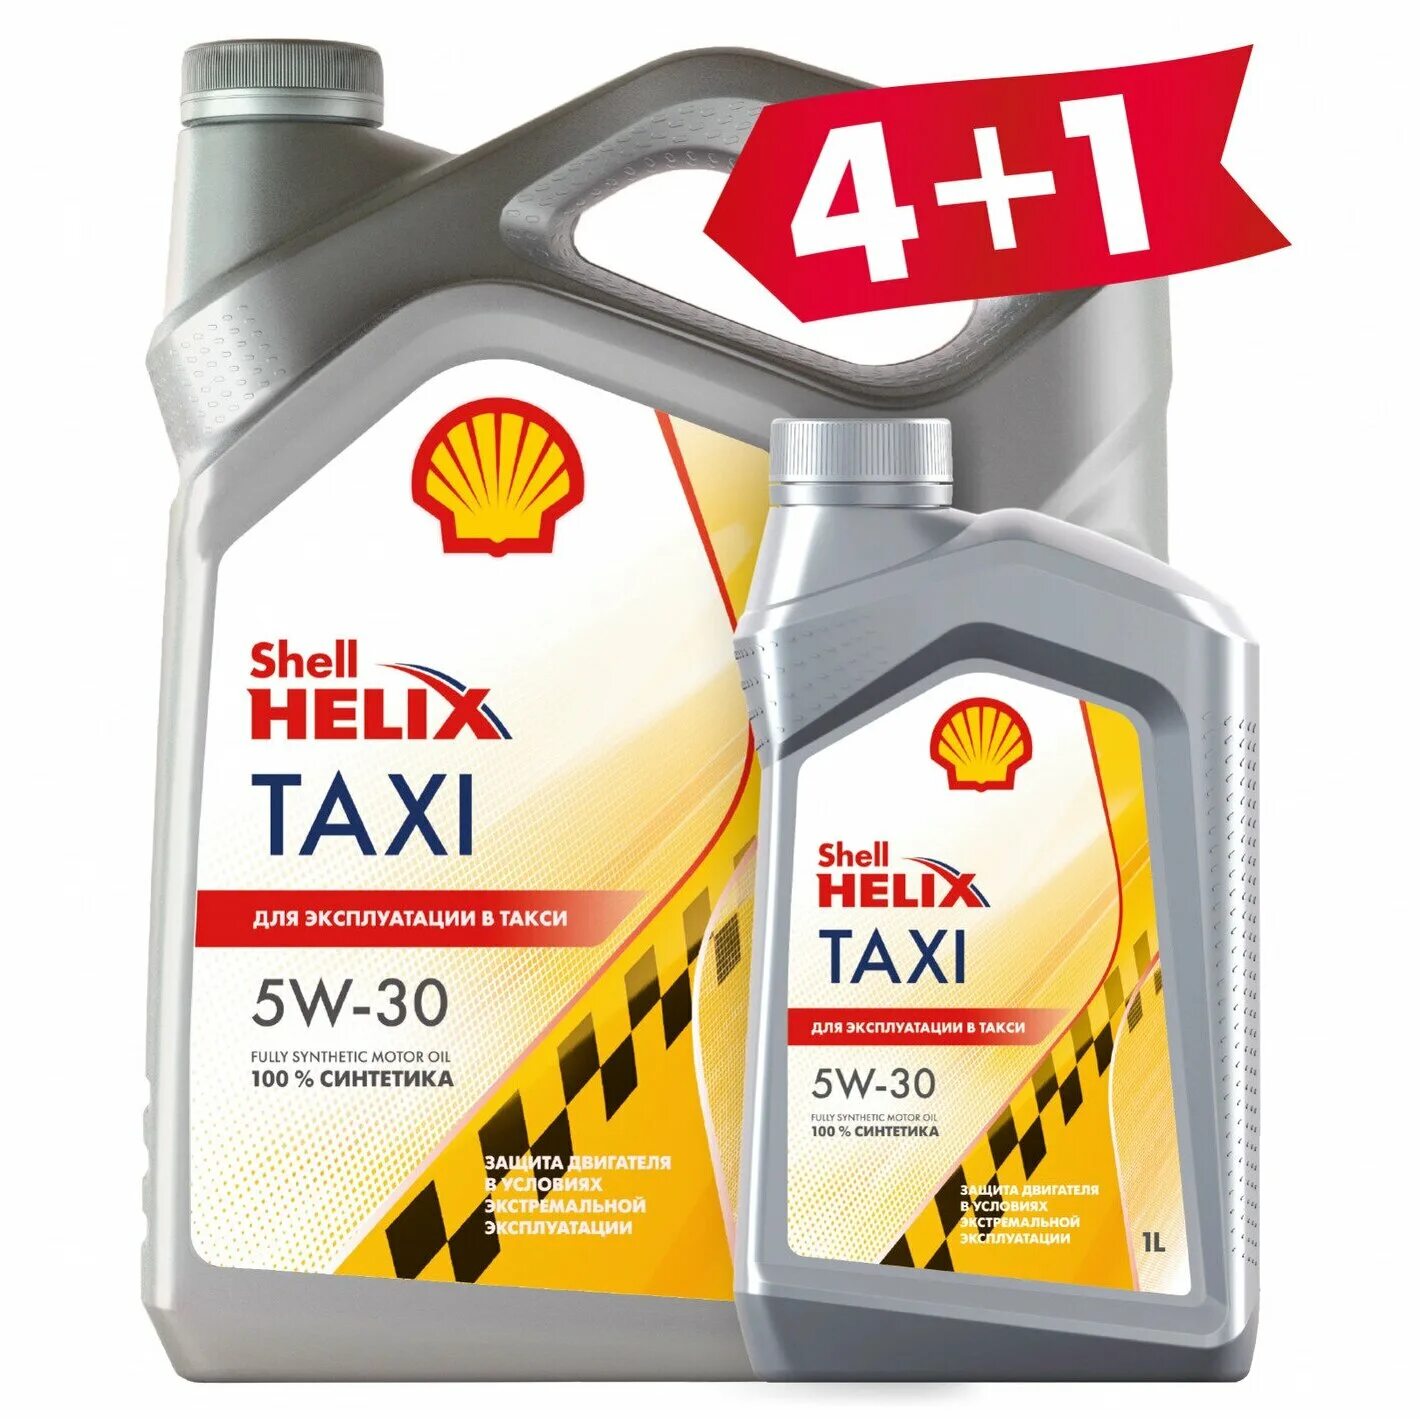 Shell Helix Taxi 5w-40 1л. Масло Шелл такси 5w30. Масло Шелл такси 5w40. Shell Taxi 5w-30. Моторное масло шелл отзывы